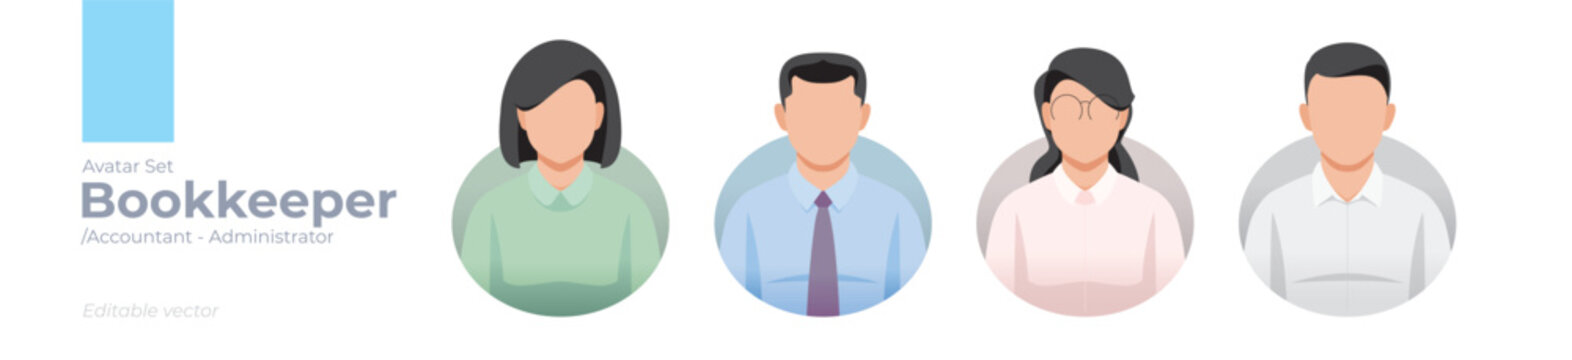 Bookkeeper picture avatar icons. Illustration of men and women wearing shirt